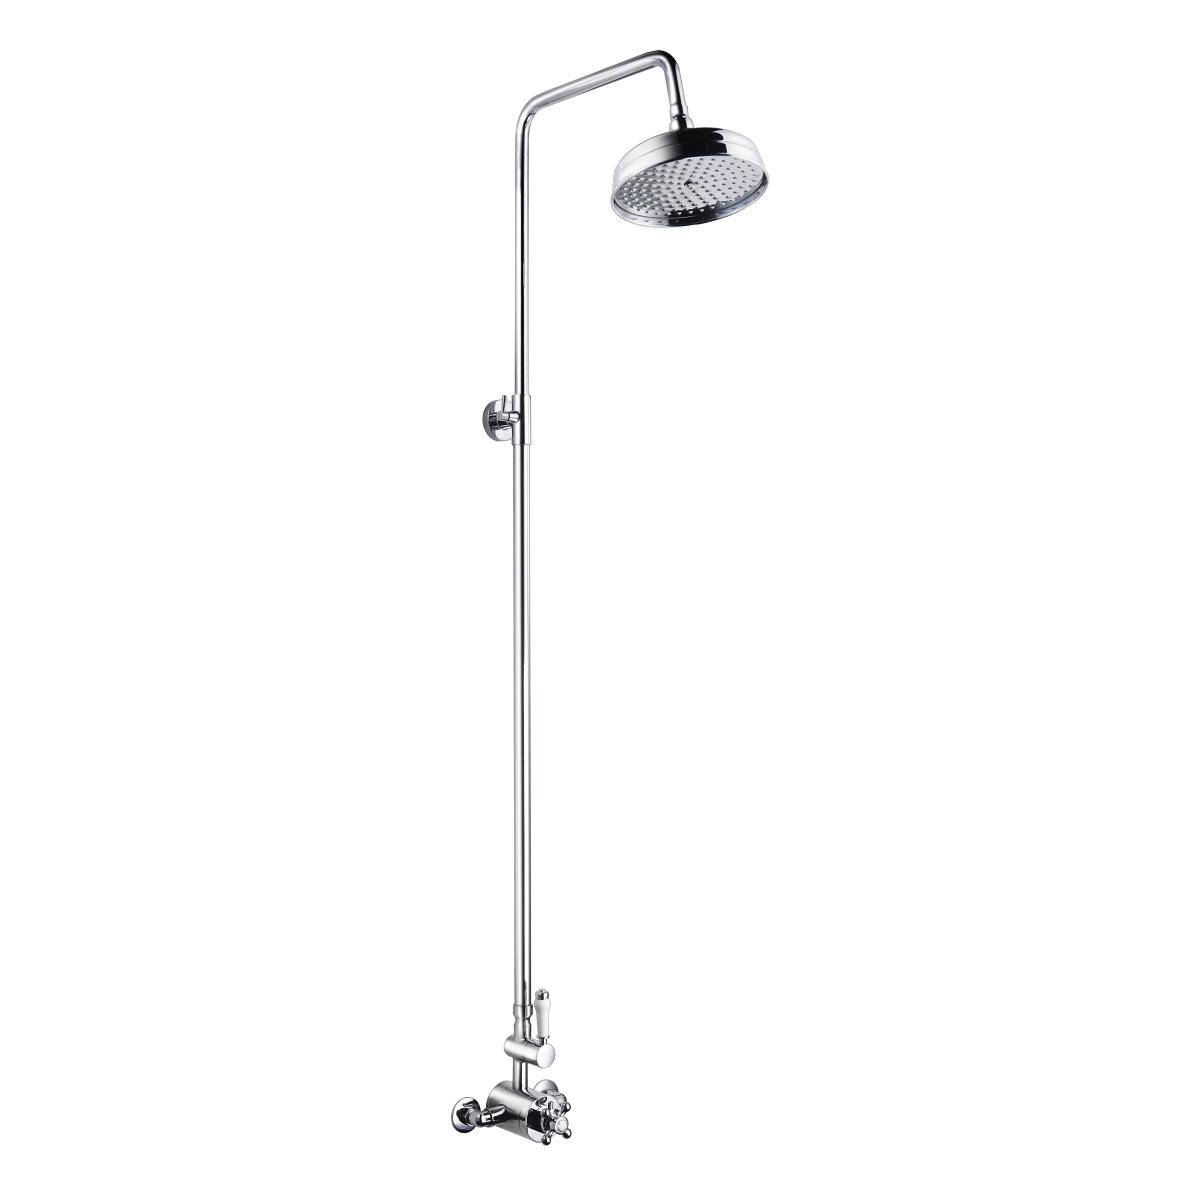 YS34173	WRAS and TMV2 certified Shower column, rain shower column with retro thermostatic faucet for UK market